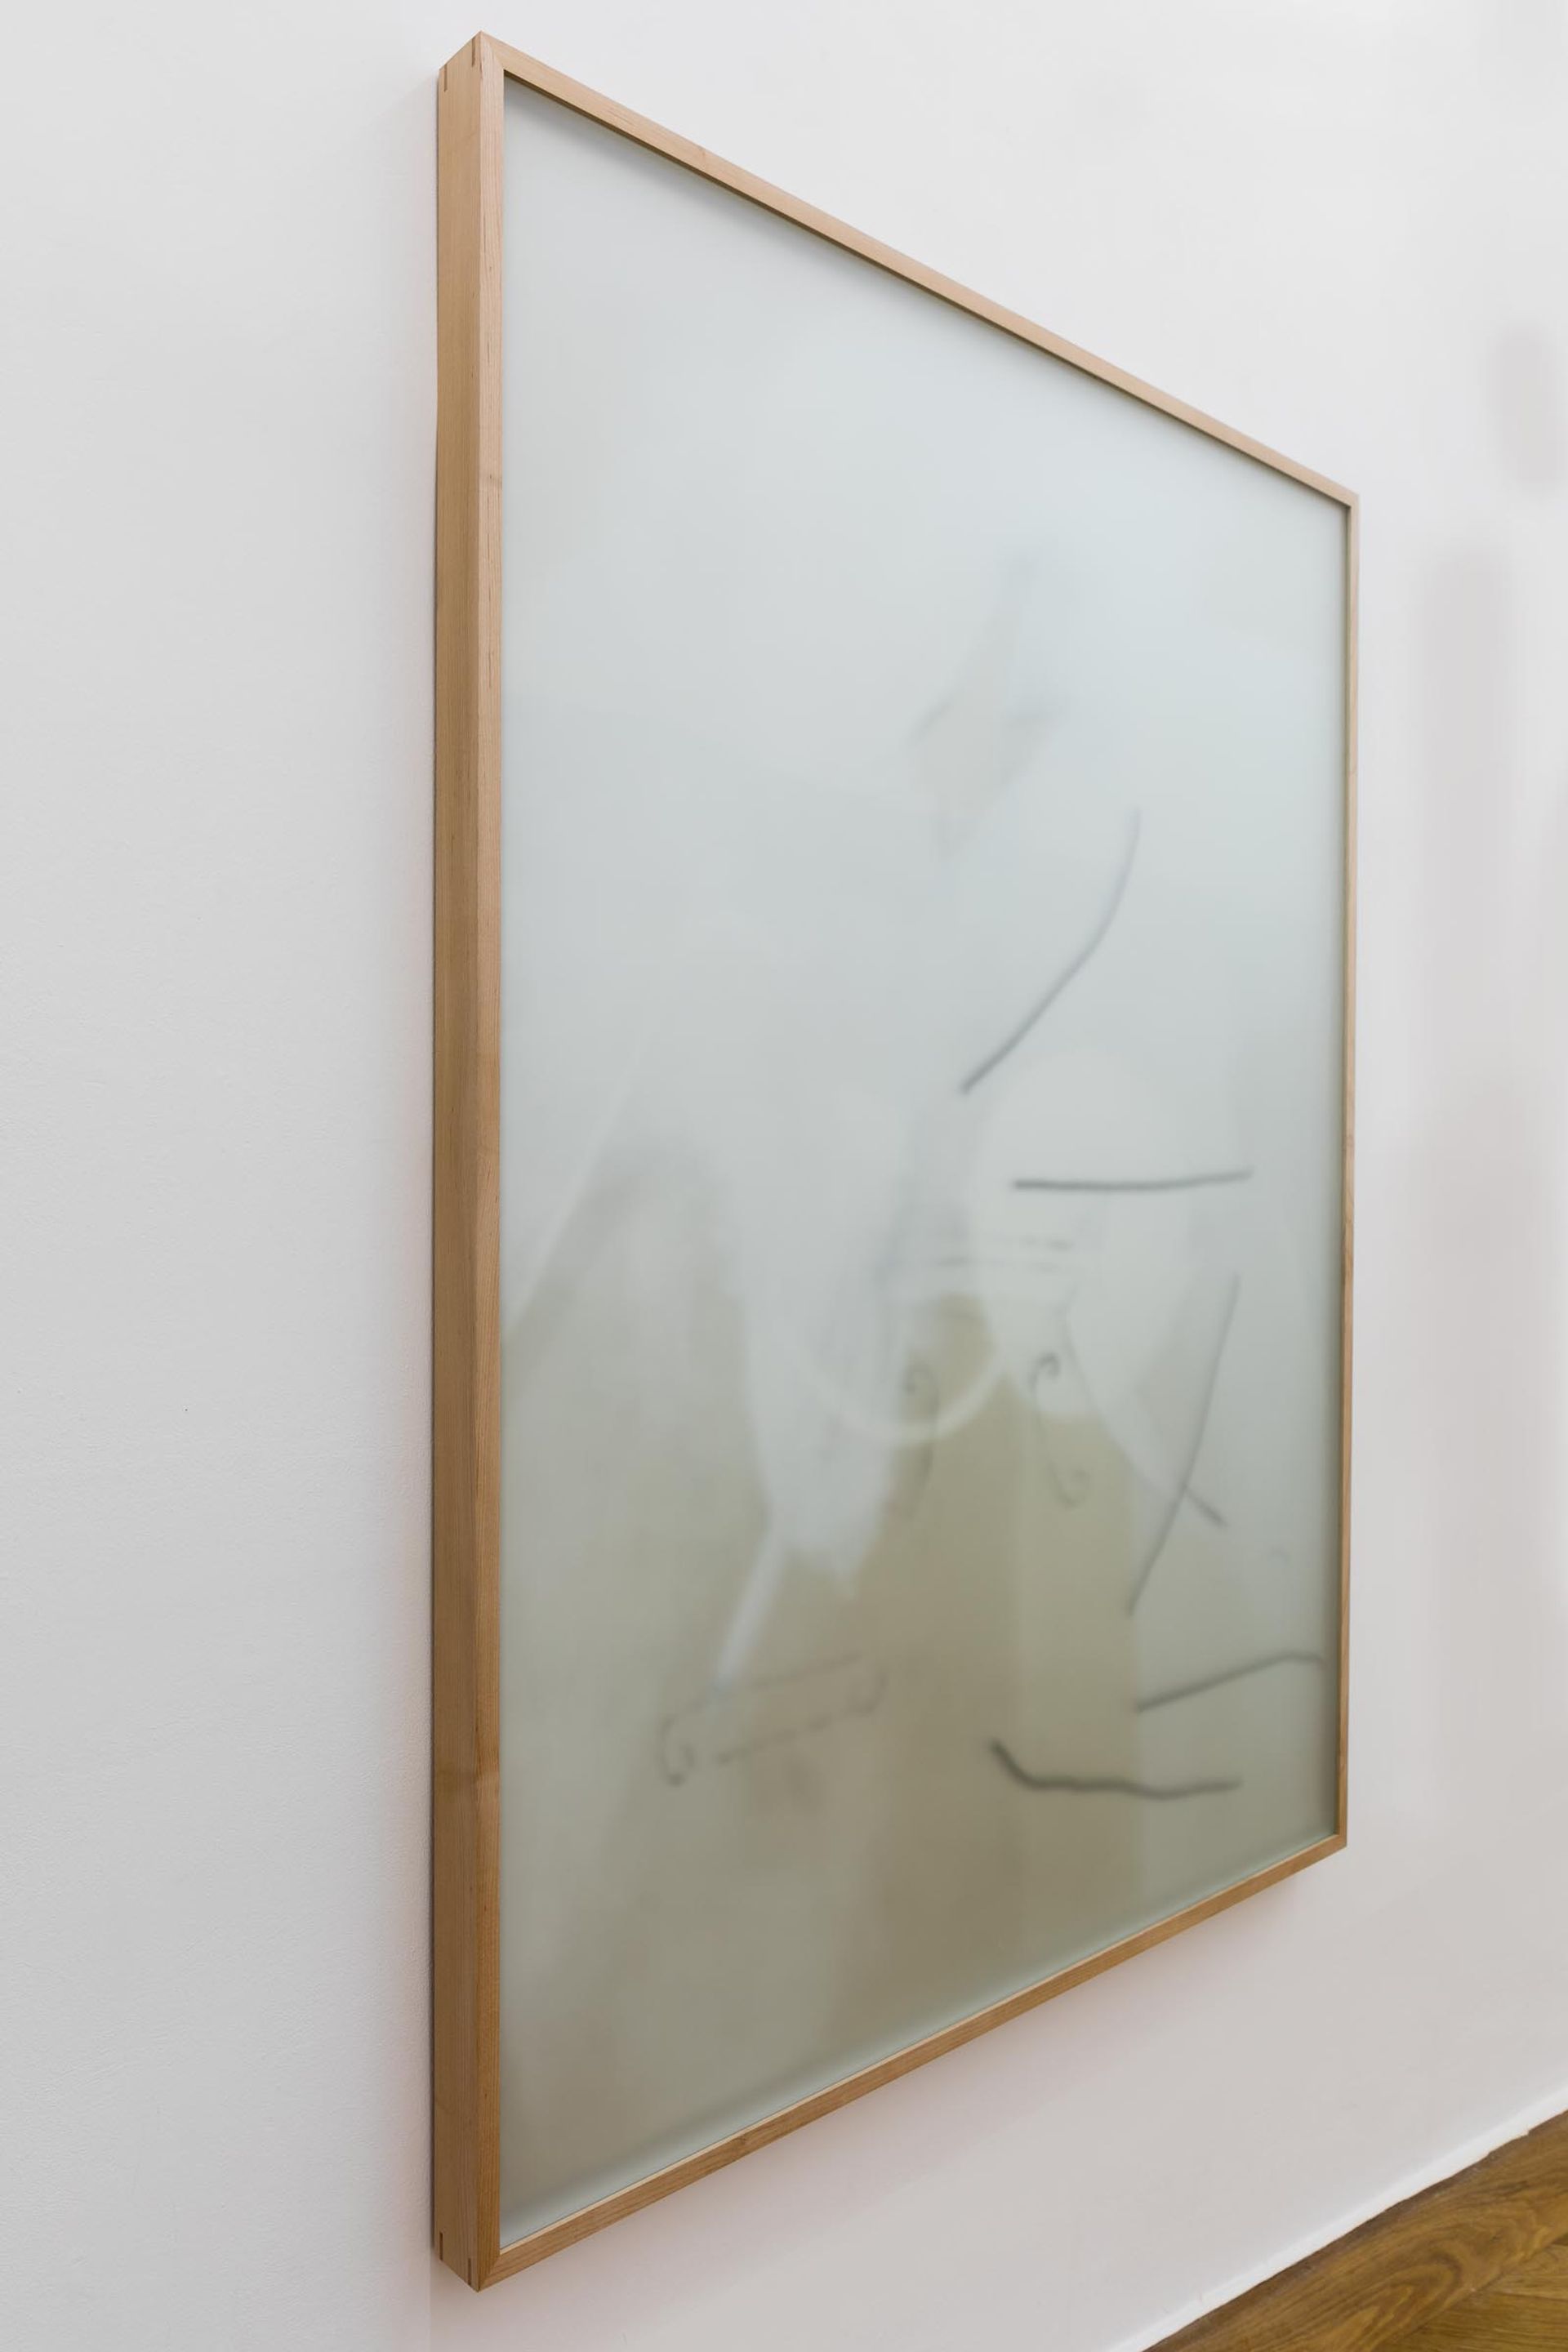 Malte Zenses, Orgelblut II, 2019, oil and pencil on canvas, opal glass and maple wood, 126.5 × 166 cm